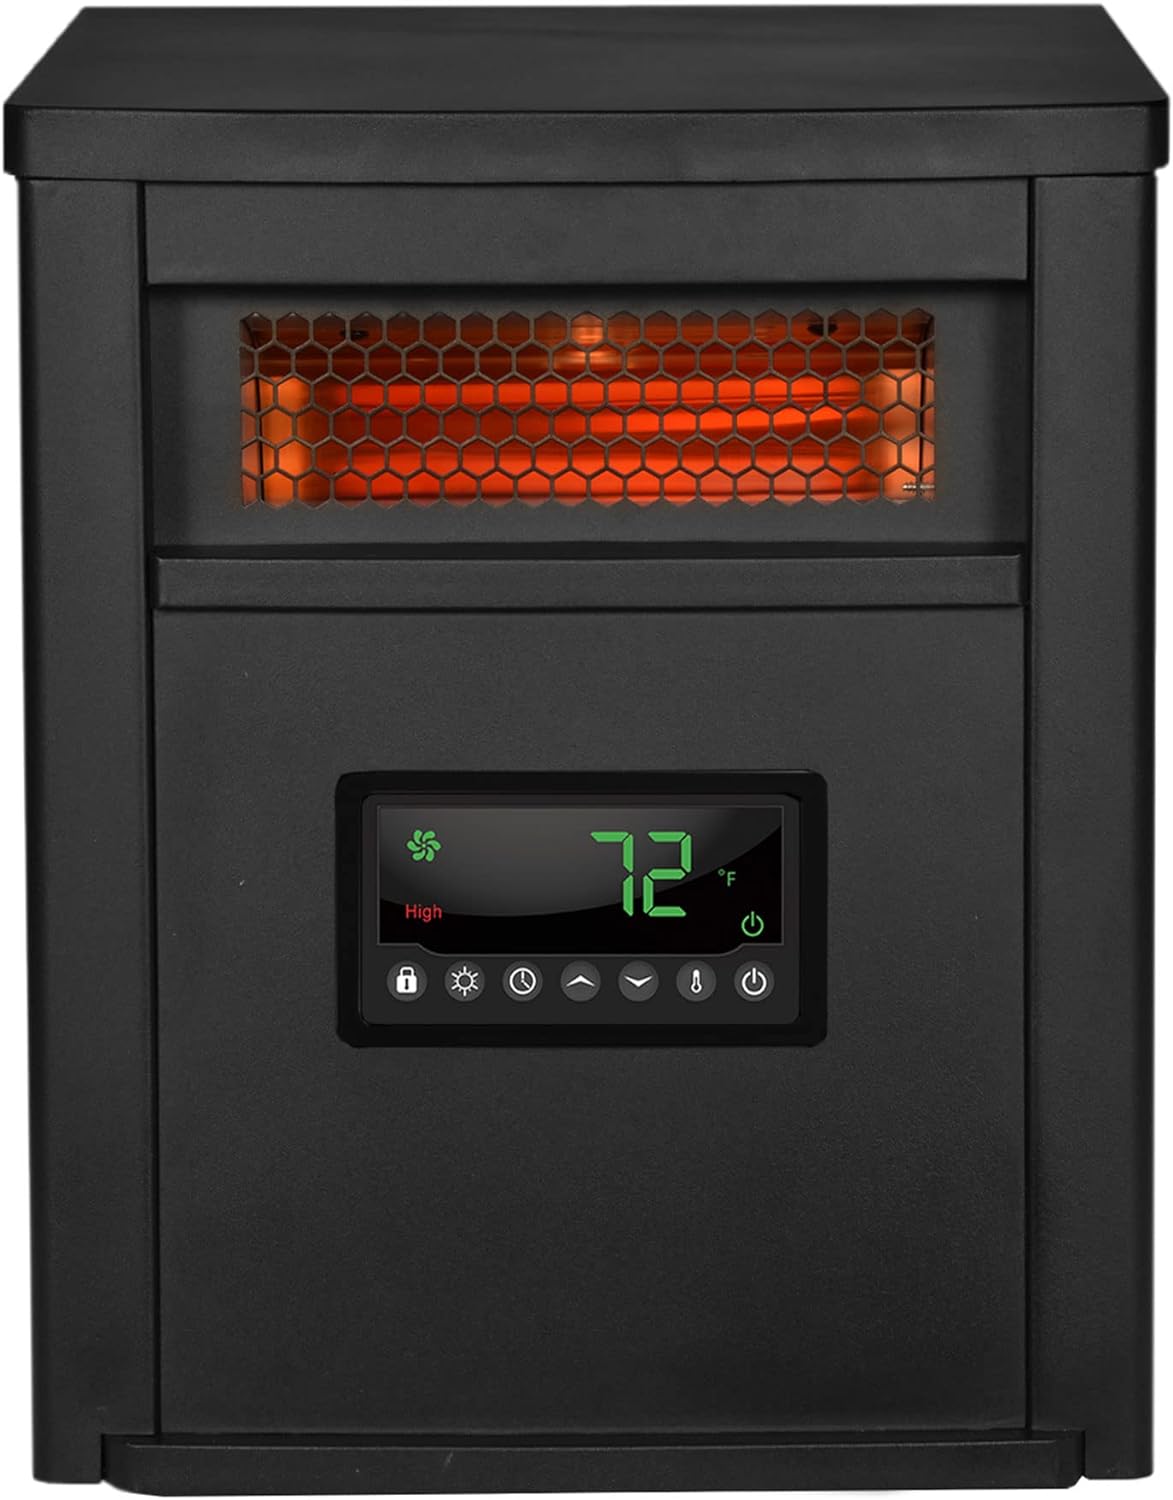 https://bigbigmart.com/wp-content/uploads/2023/11/LifeSmart-LifePro-1500W-Portable-Electric-Infrared-Quartz-Indoor-Space-Heater-with-8-Adjustable-Heating-Elements-and-Remote-Control-Black1.jpg